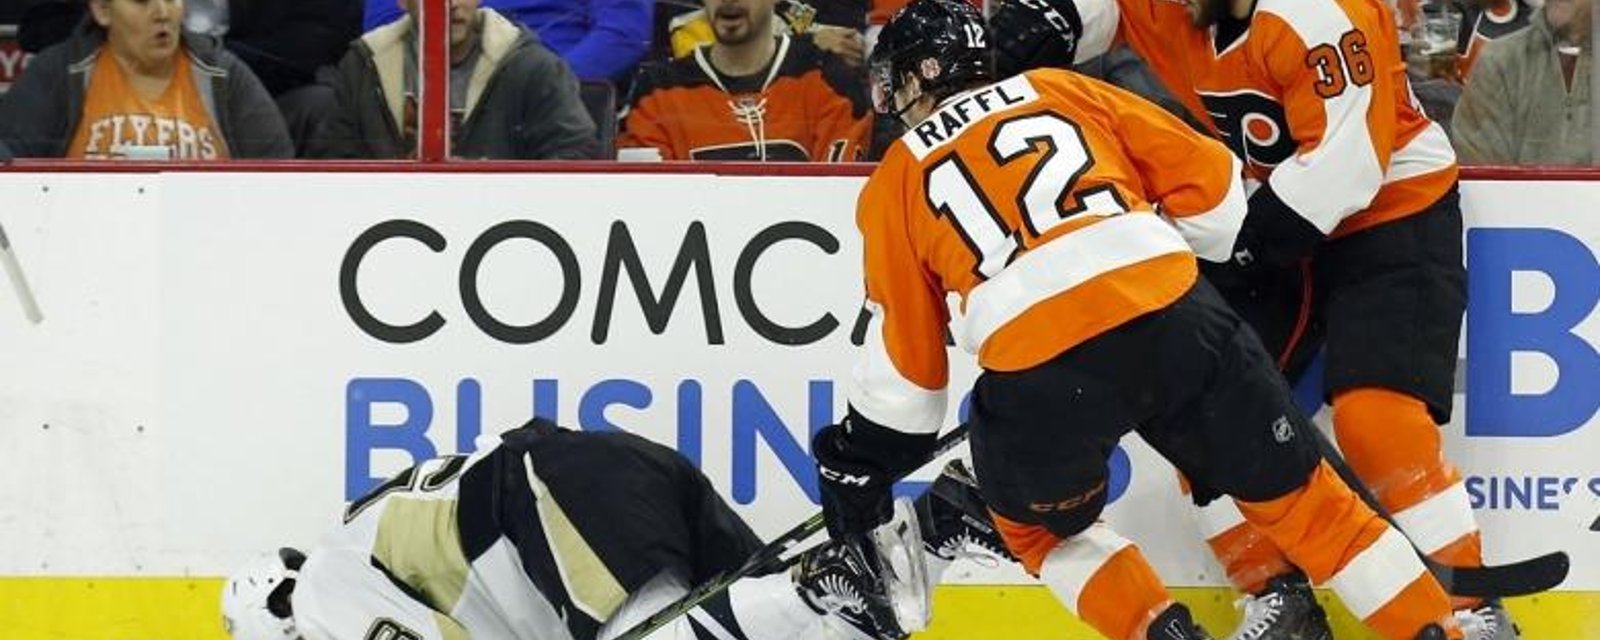 Flyers fans have started a GoFundMe Campaign to buy the Pittsburgh Penguins.